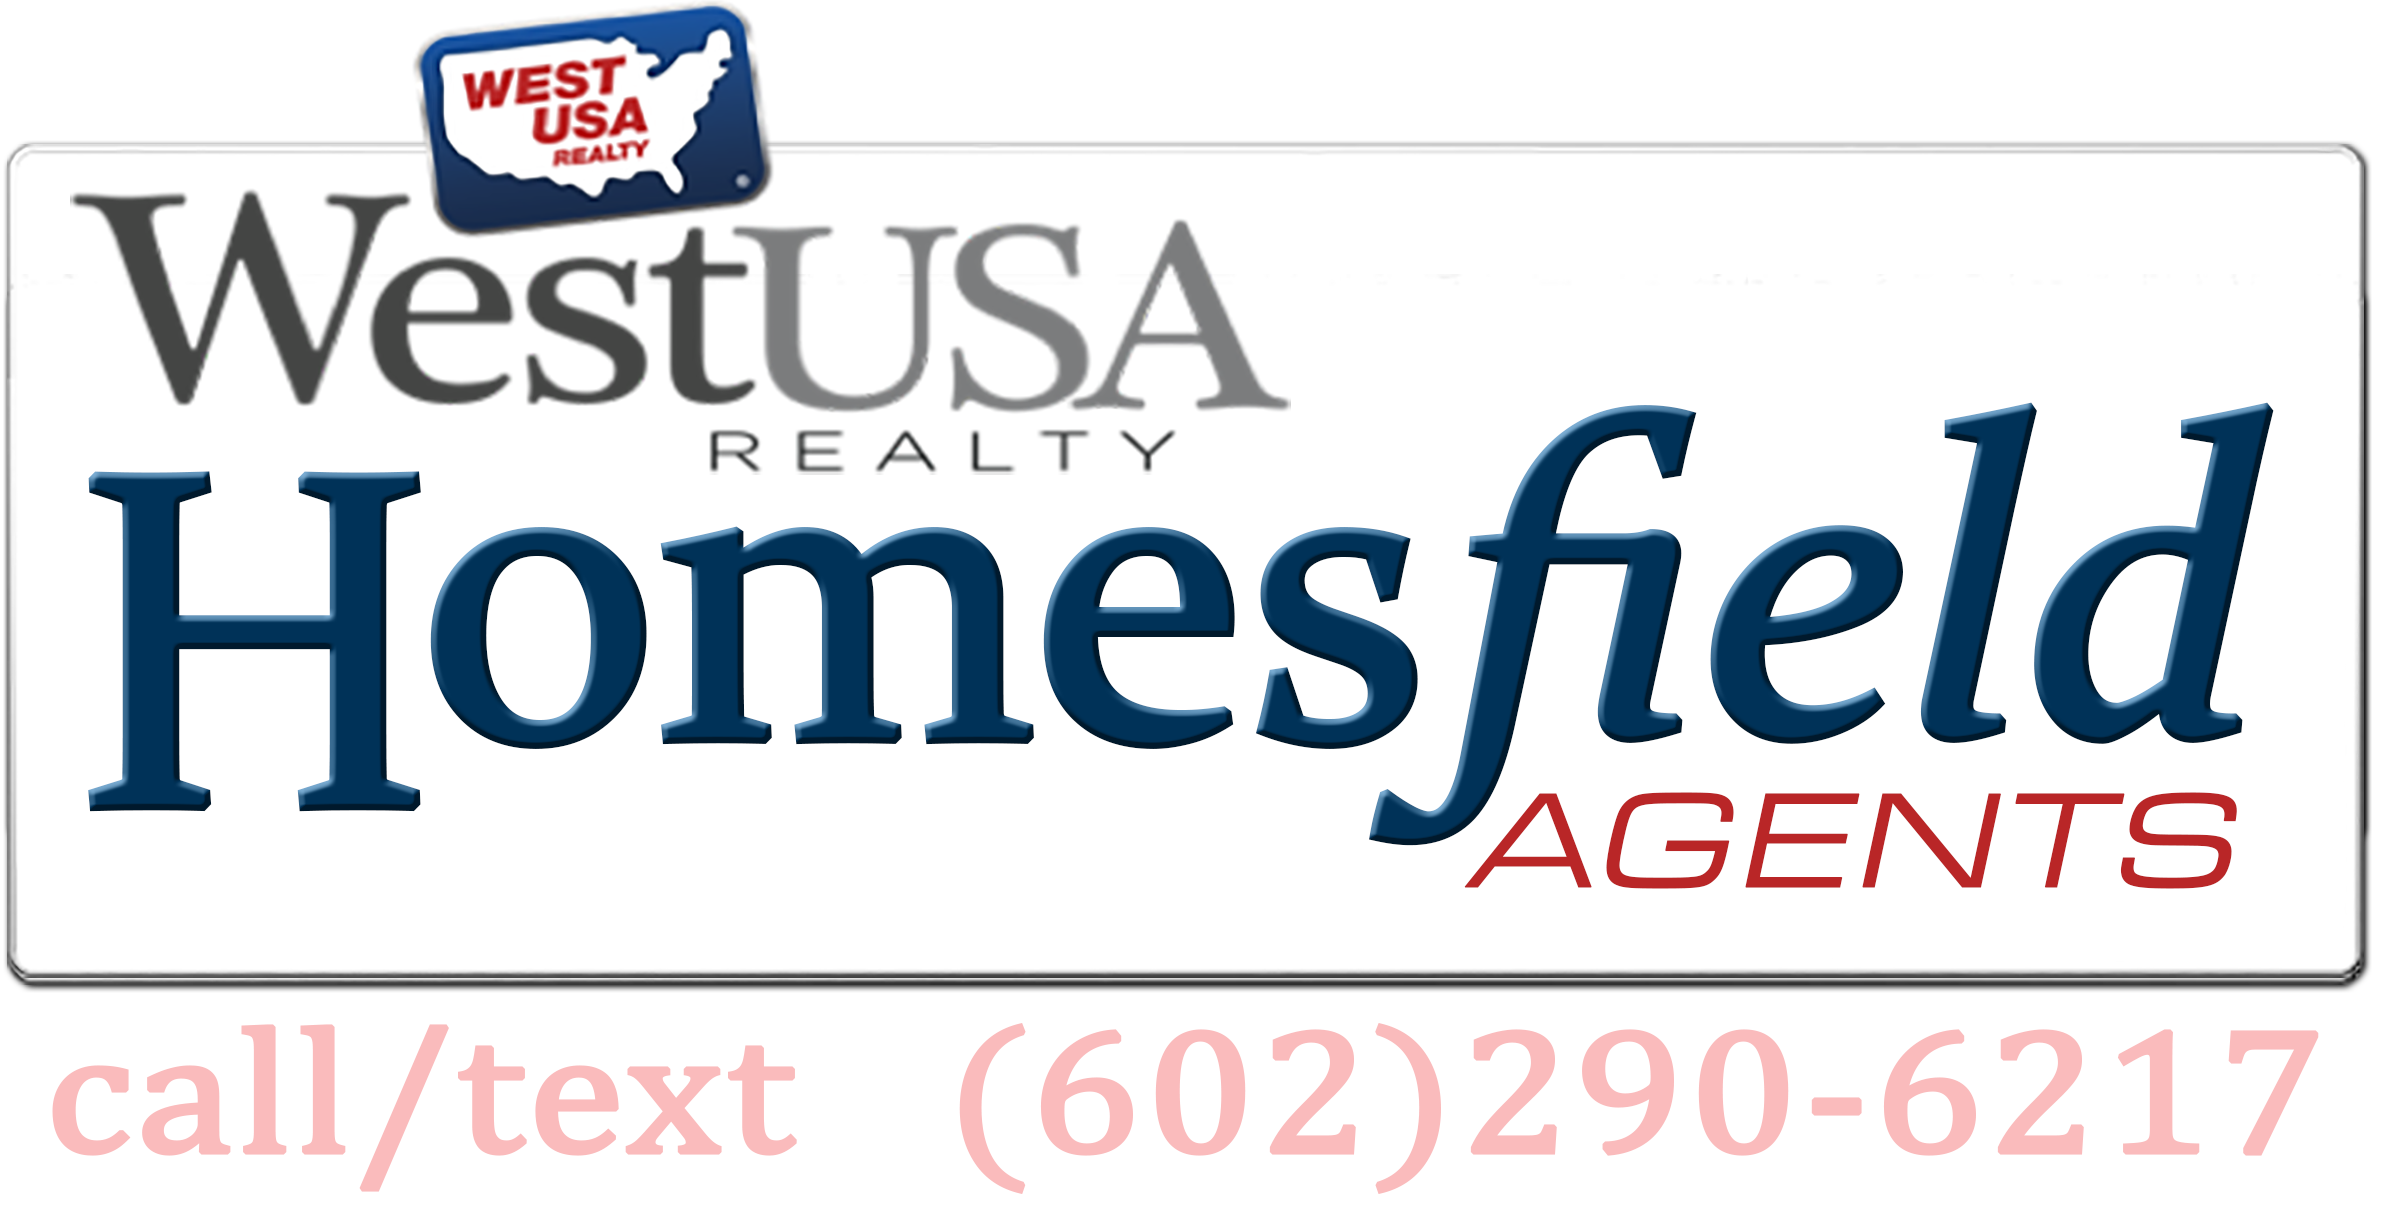 Homesfield Agents of West USA Realty